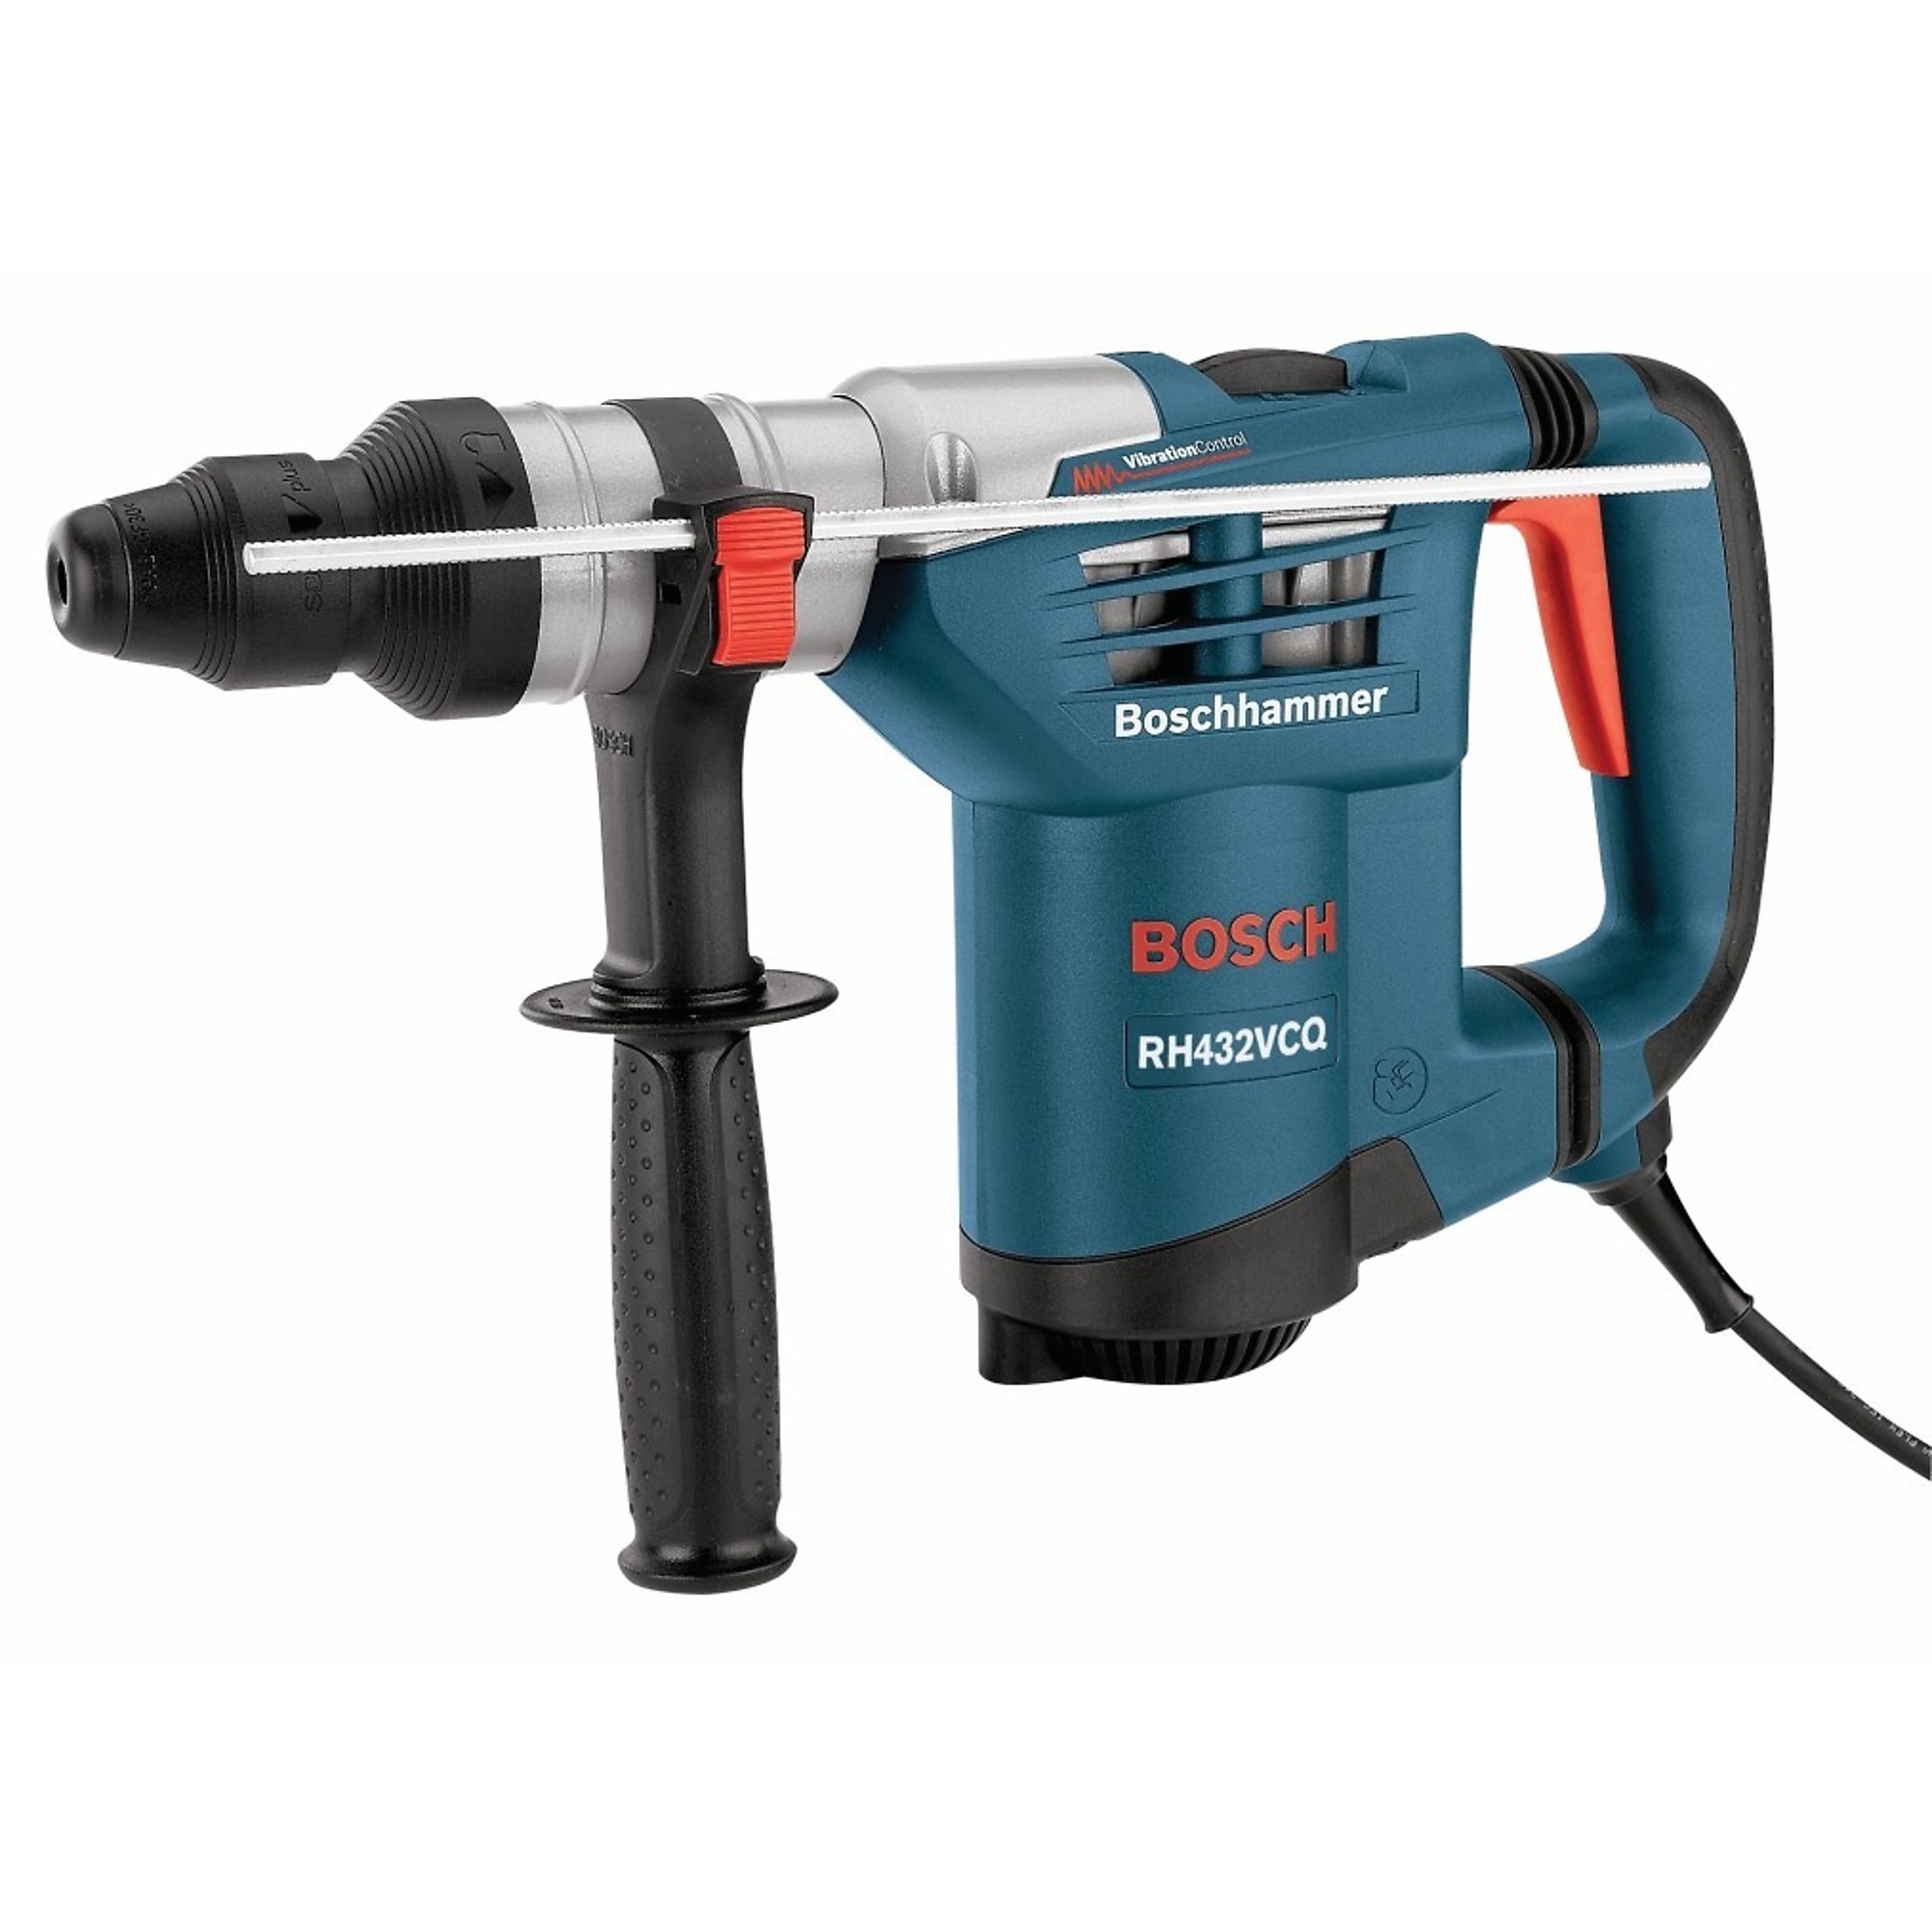 Bosch, 1-1/4Inch SDS-plus Rotary Hammer w/ VC, Chuck Size 1-1/4 in, Volts 120, Amps 8.5, Model RH432VCQ